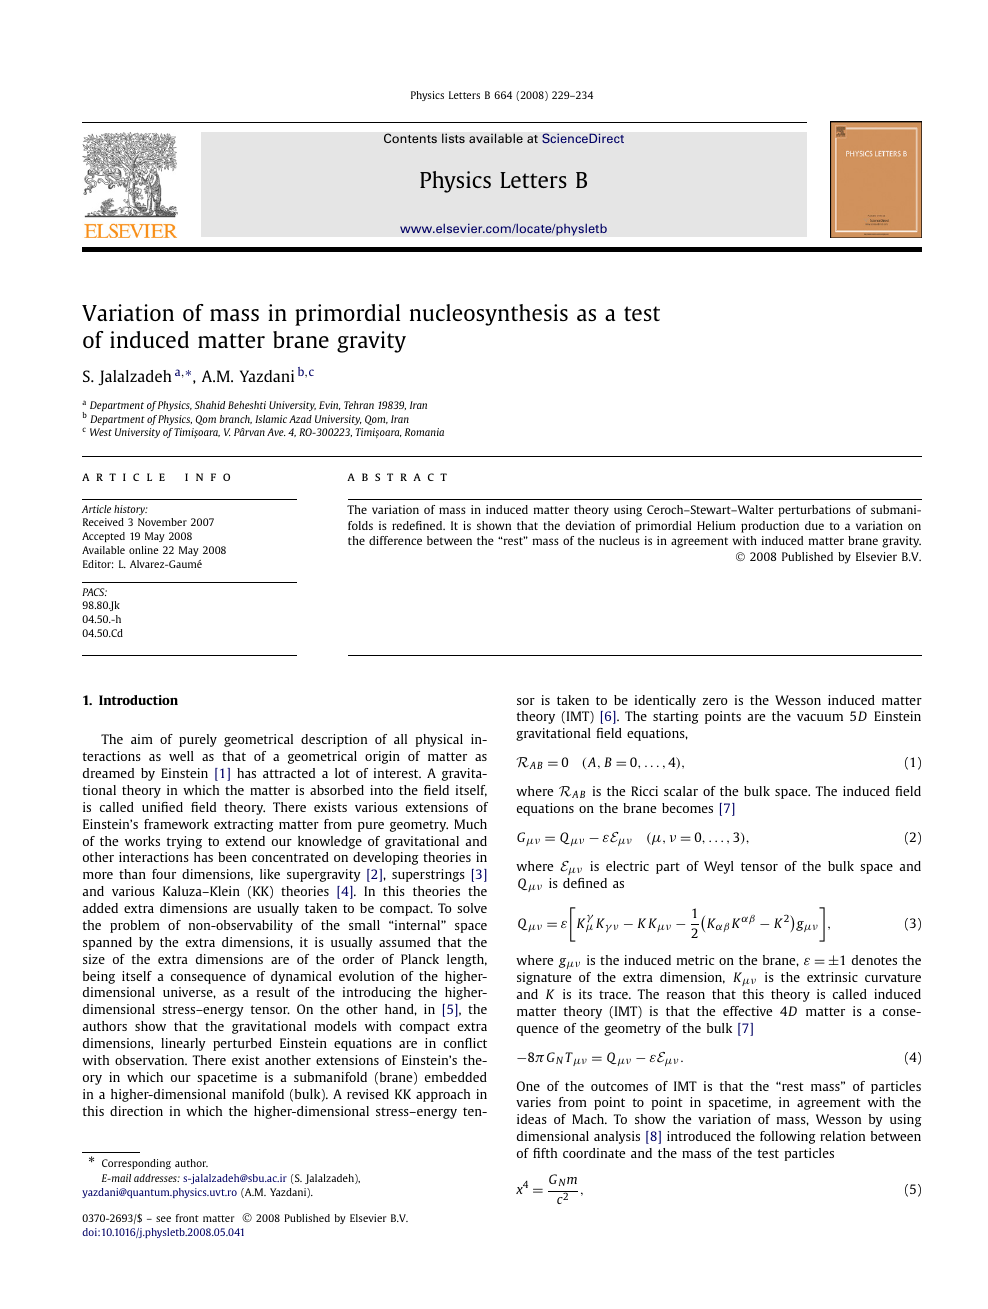 Variation Of Mass In Primordial Nucleosynthesis As A Test Of Induced Matter Brane Gravity Topic Of Research Paper In Physical Sciences Download Scholarly Article Pdf And Read For Free On Cyberleninka